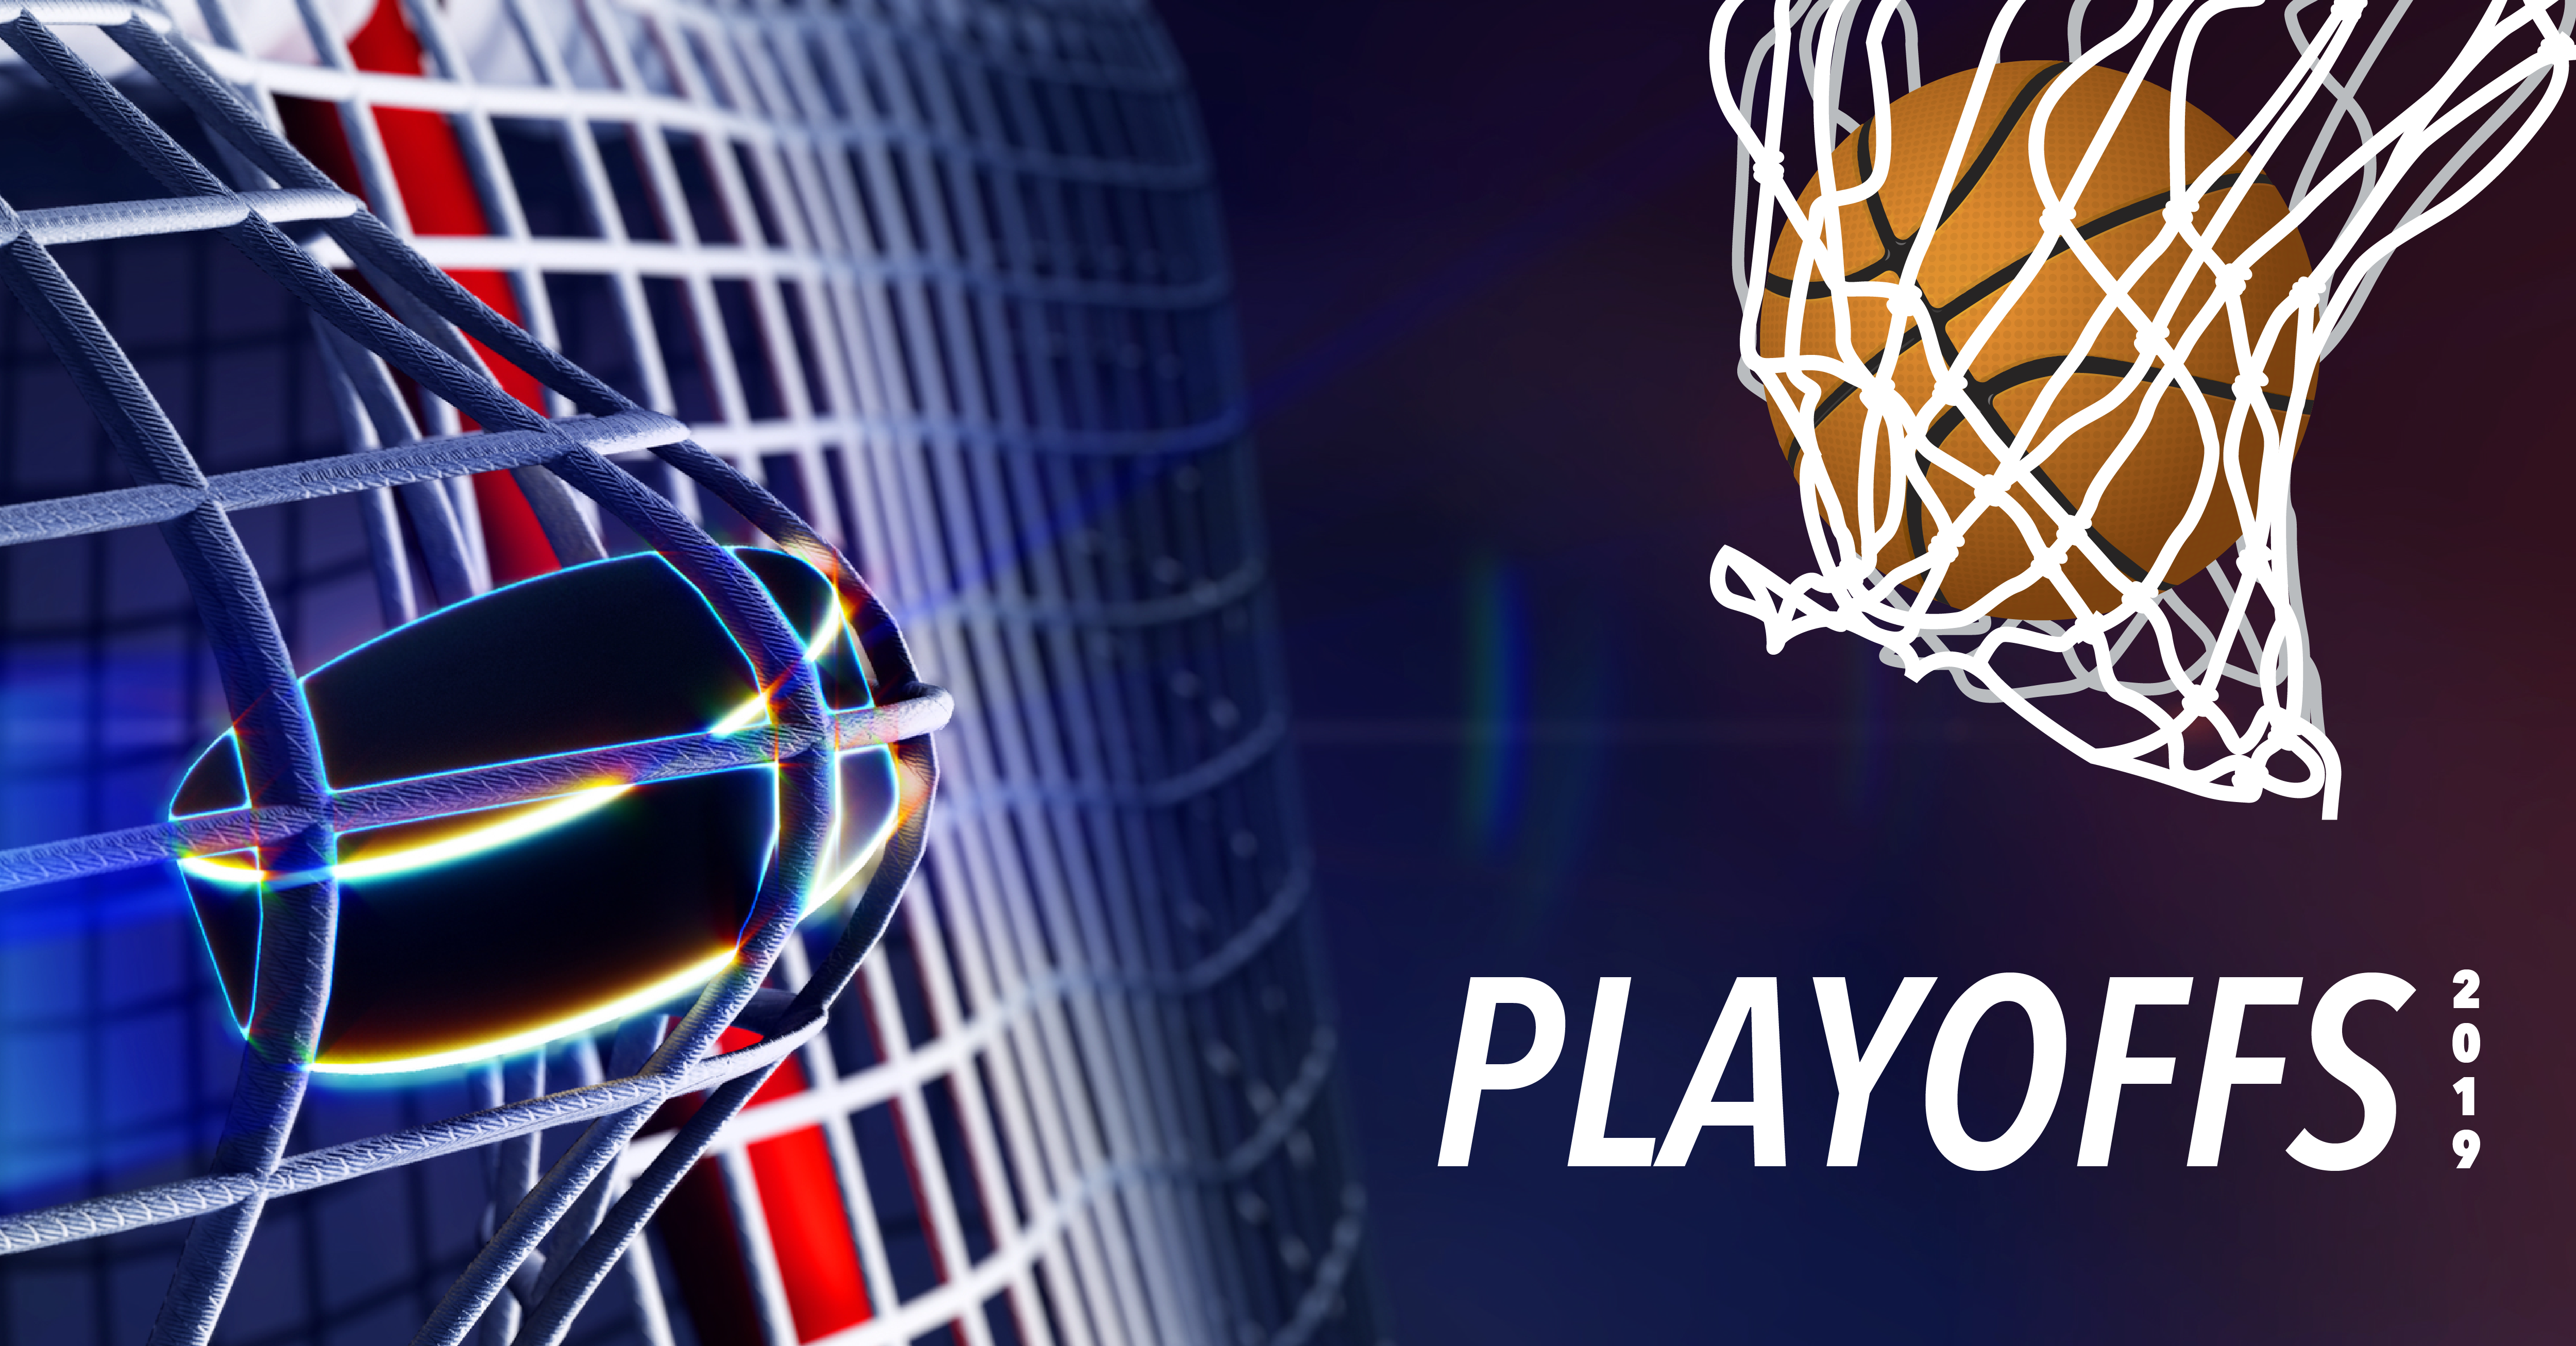 How The NBA And NHL Playoffs Can Help Your Business